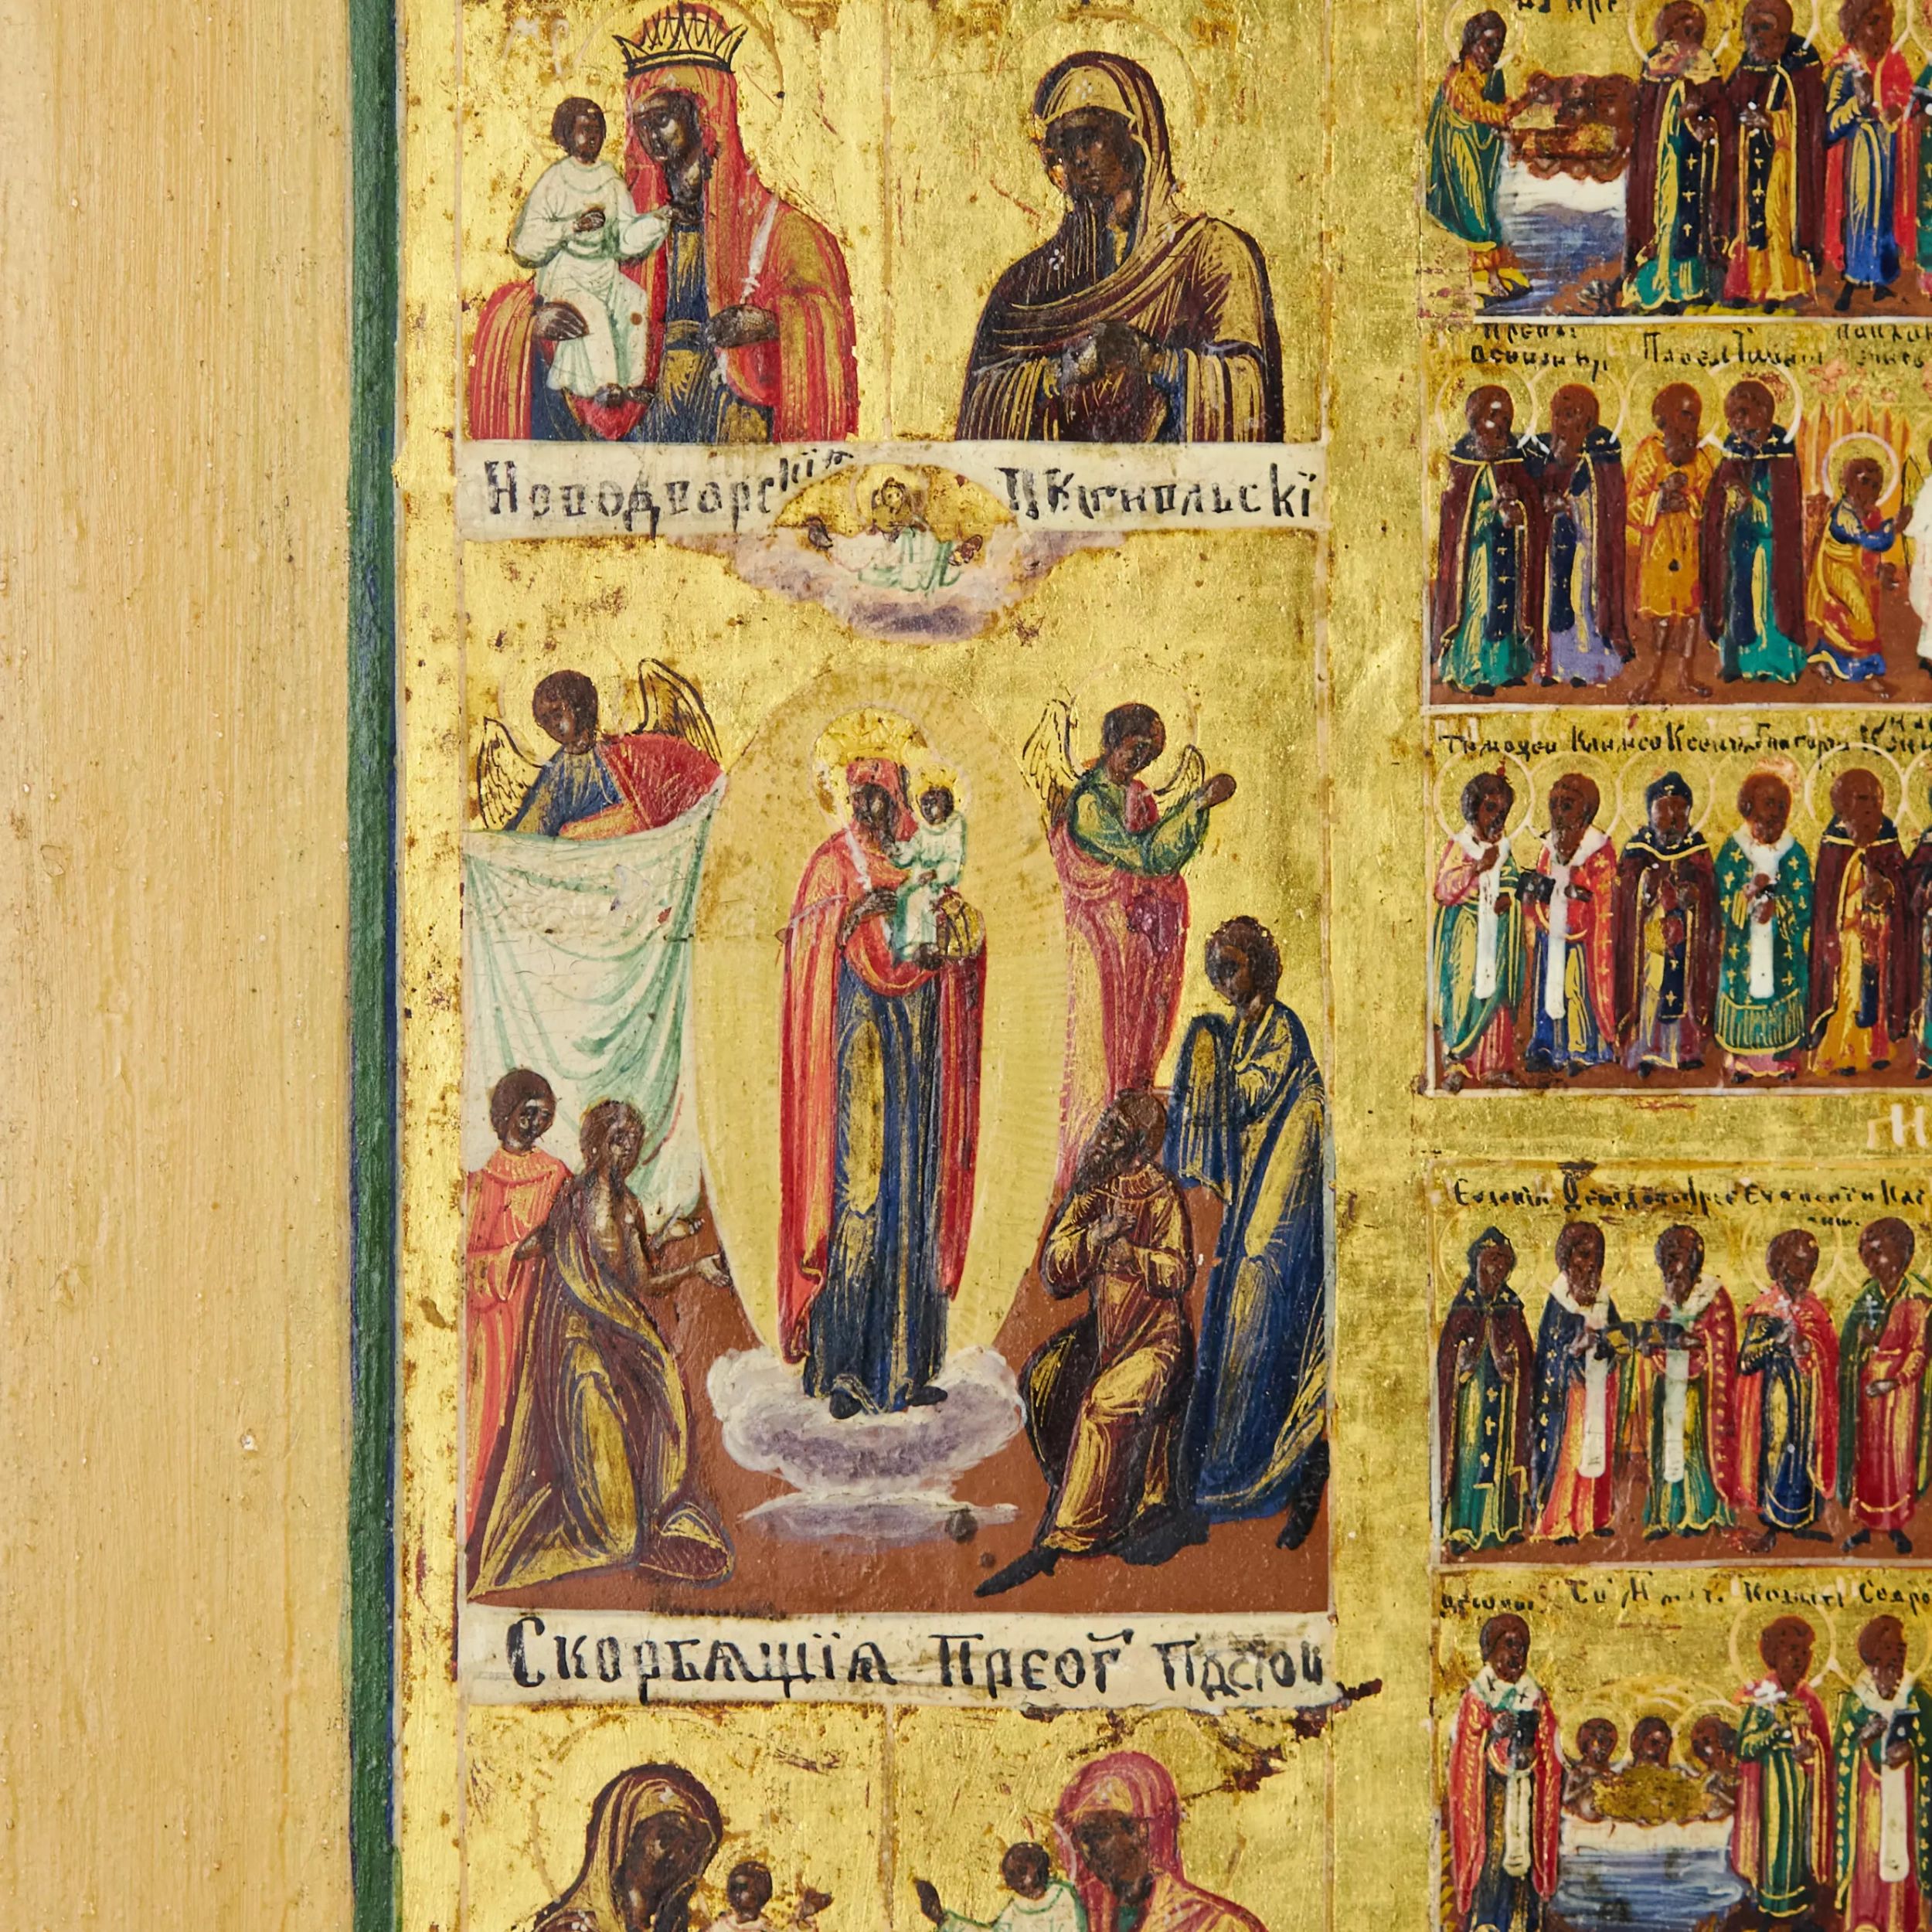 Magnificent holidays with an annual menaion and a two-row cycle of Theotokos icons. 19th century. - Image 9 of 11